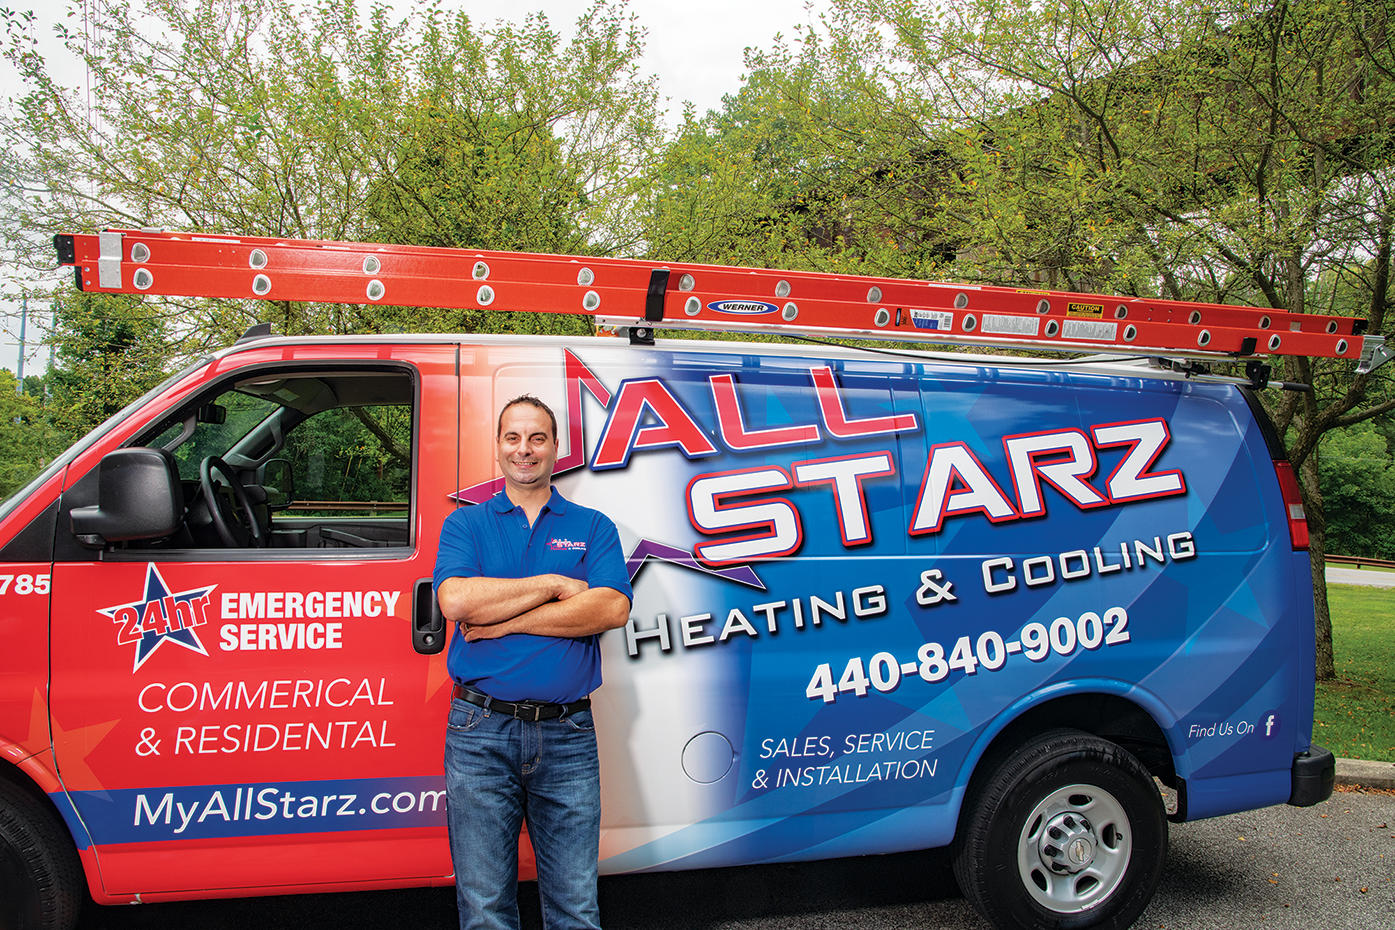 As a reliable HVAC contractor with 20-plus years experience, our owner is hands-on. He not only quotes jobs, he also installs the air conditioning units and does furnace repairs.